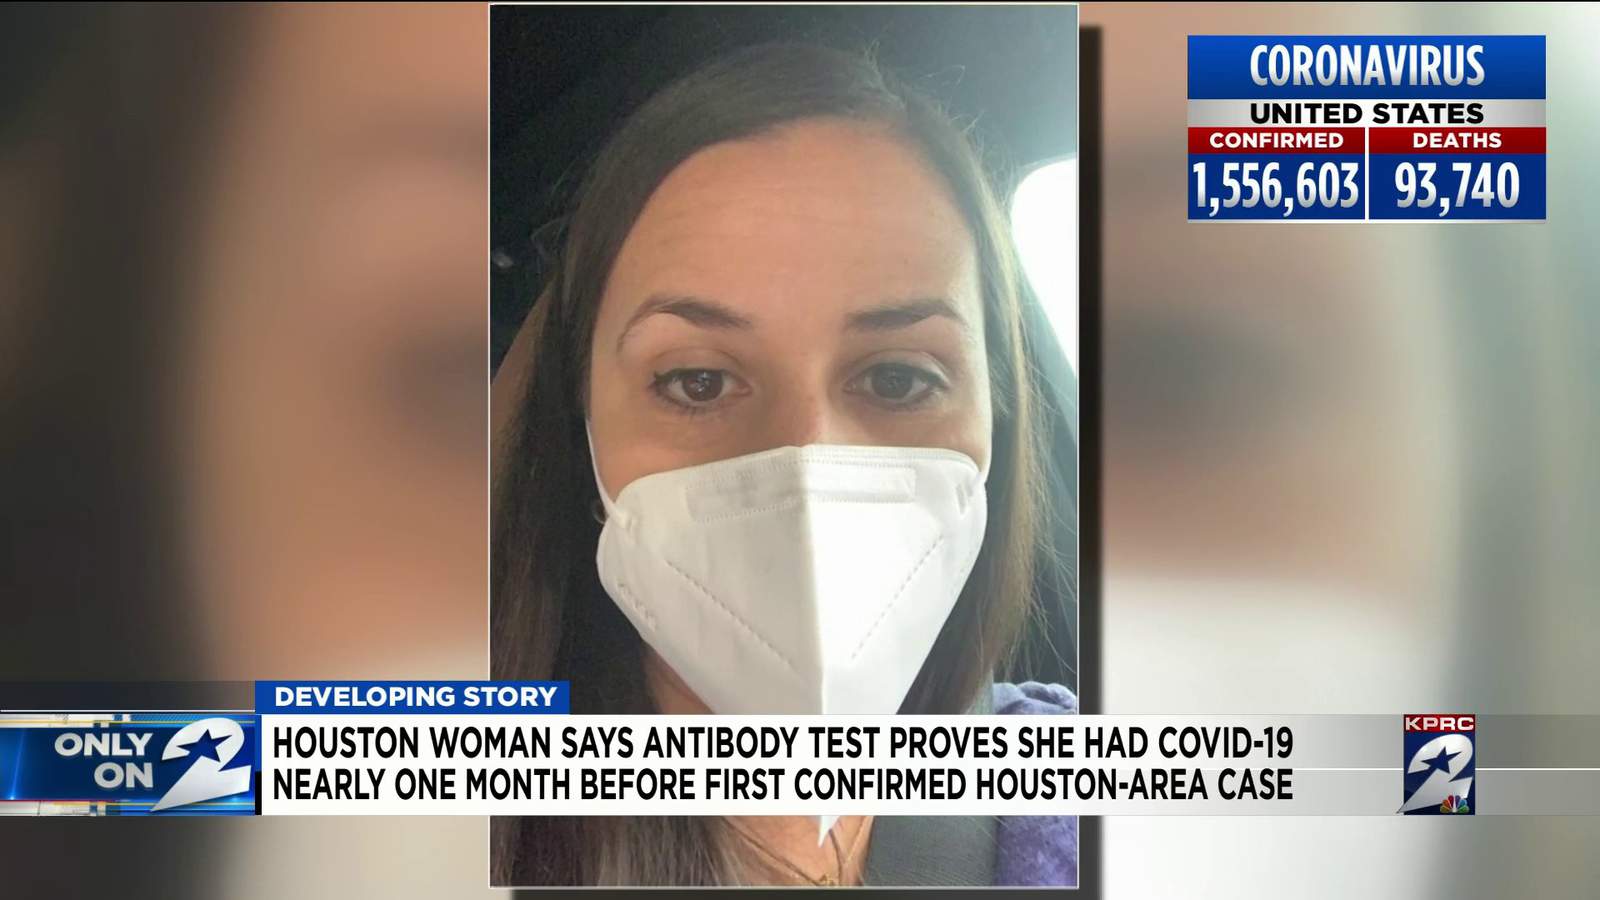 Houston woman believes she had coronavirus nearly a month before the first confirmed case